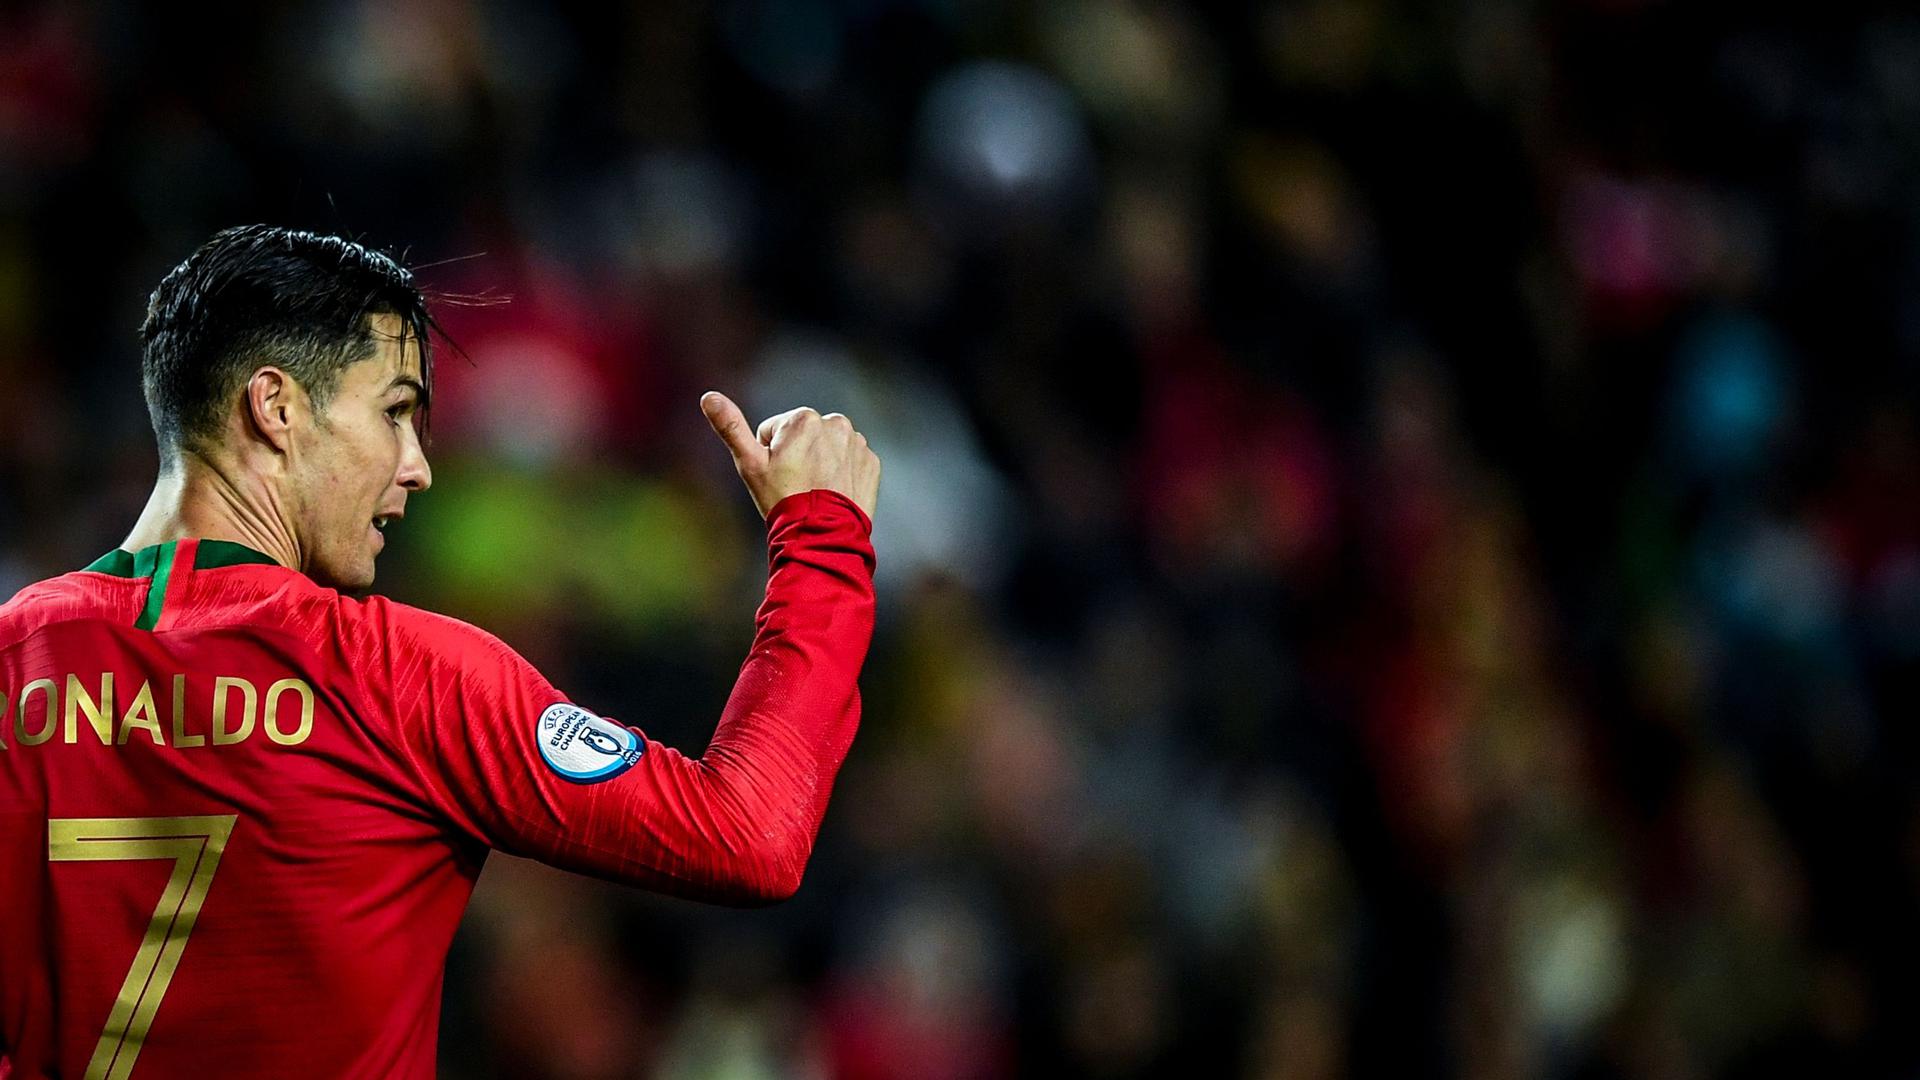 Portugal's forward Cristiano Ronaldo gestures during the Euro 2020 Group B football qualification match between Portugal and Lithuania at the Algarve stadium in Faro, on November 14, 2019. (Photo by PATRICIA DE MELO MOREIRA / AFP)